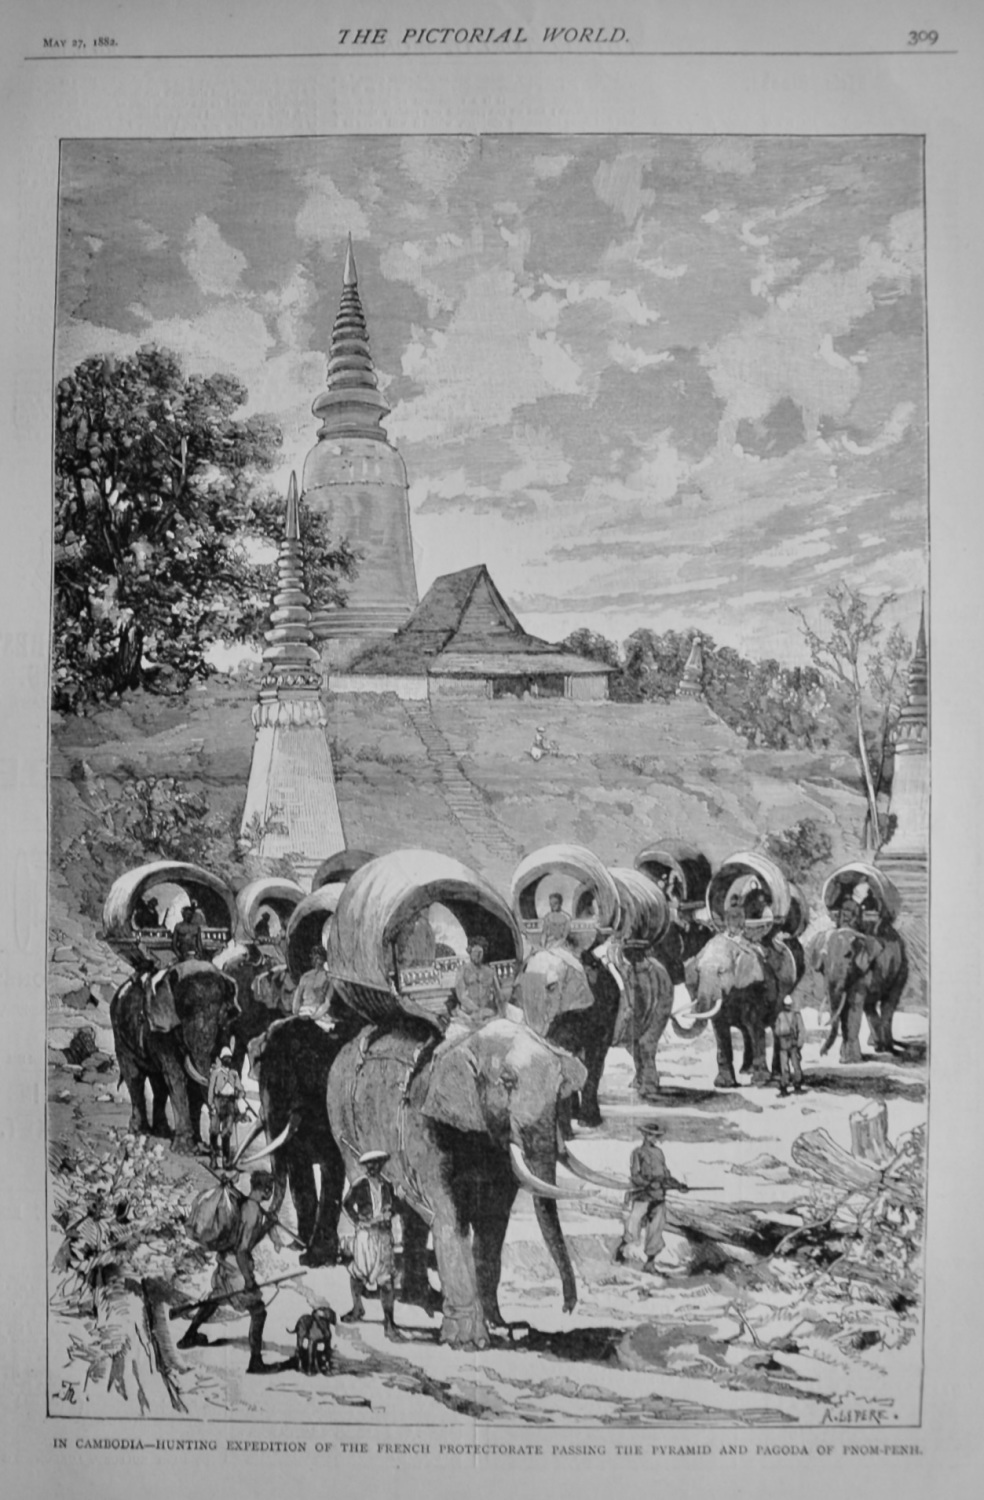 In Cambodia-Hunting Expedition of the French Protectorate Passing the Pyram